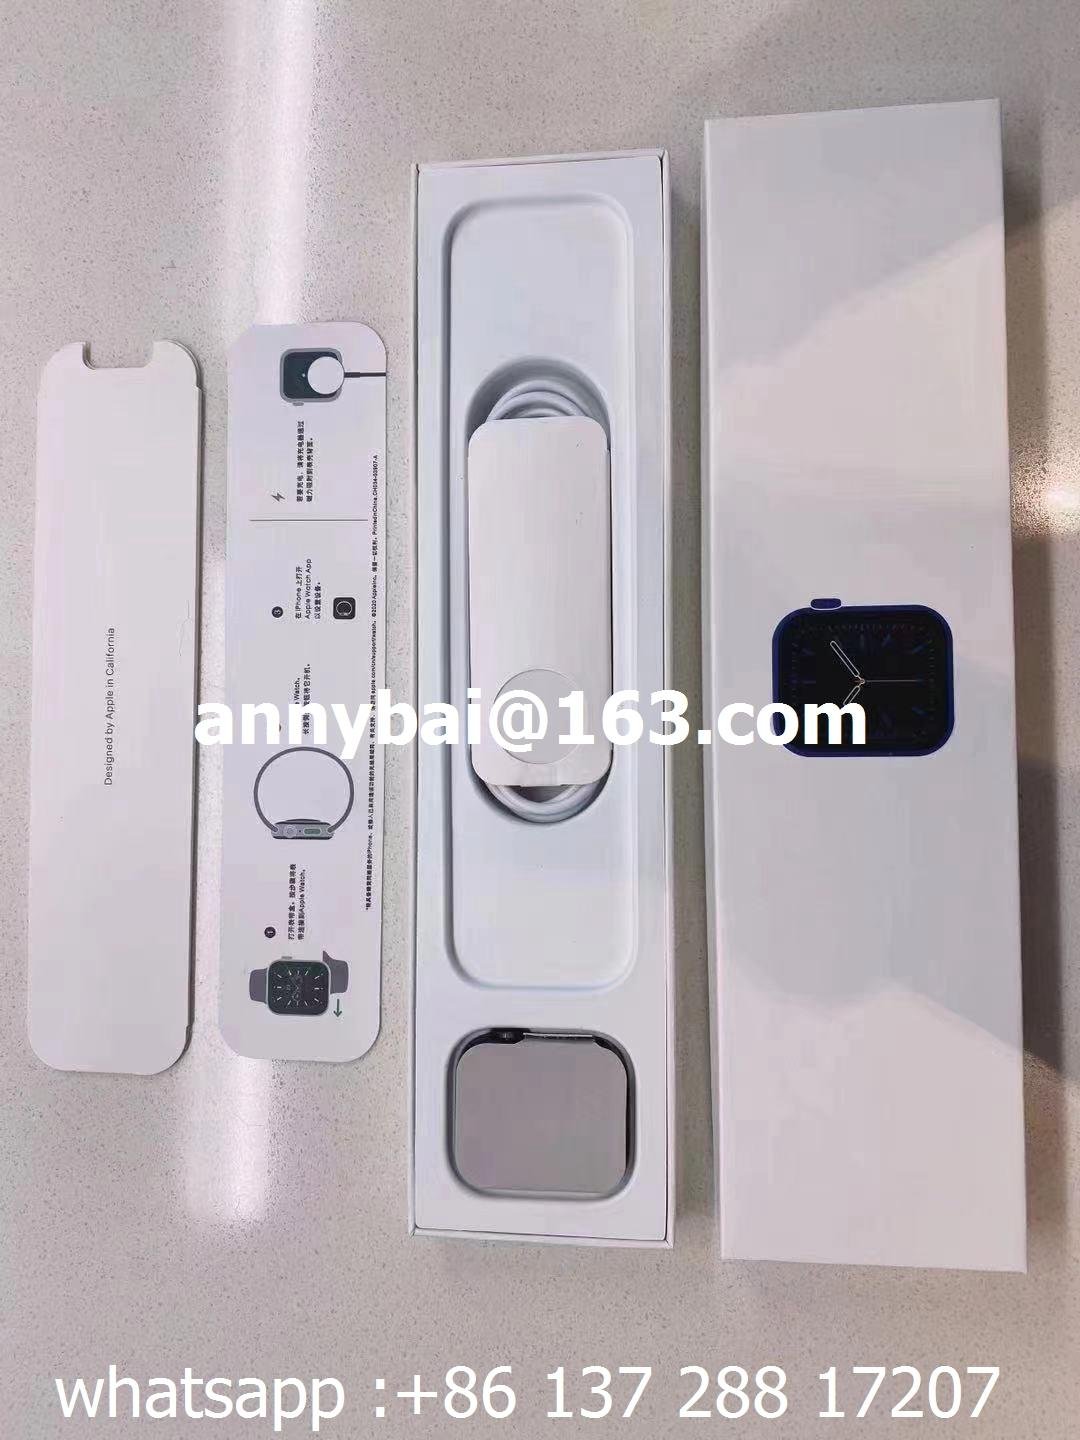 Hot selling new product apple6 version smart watch  